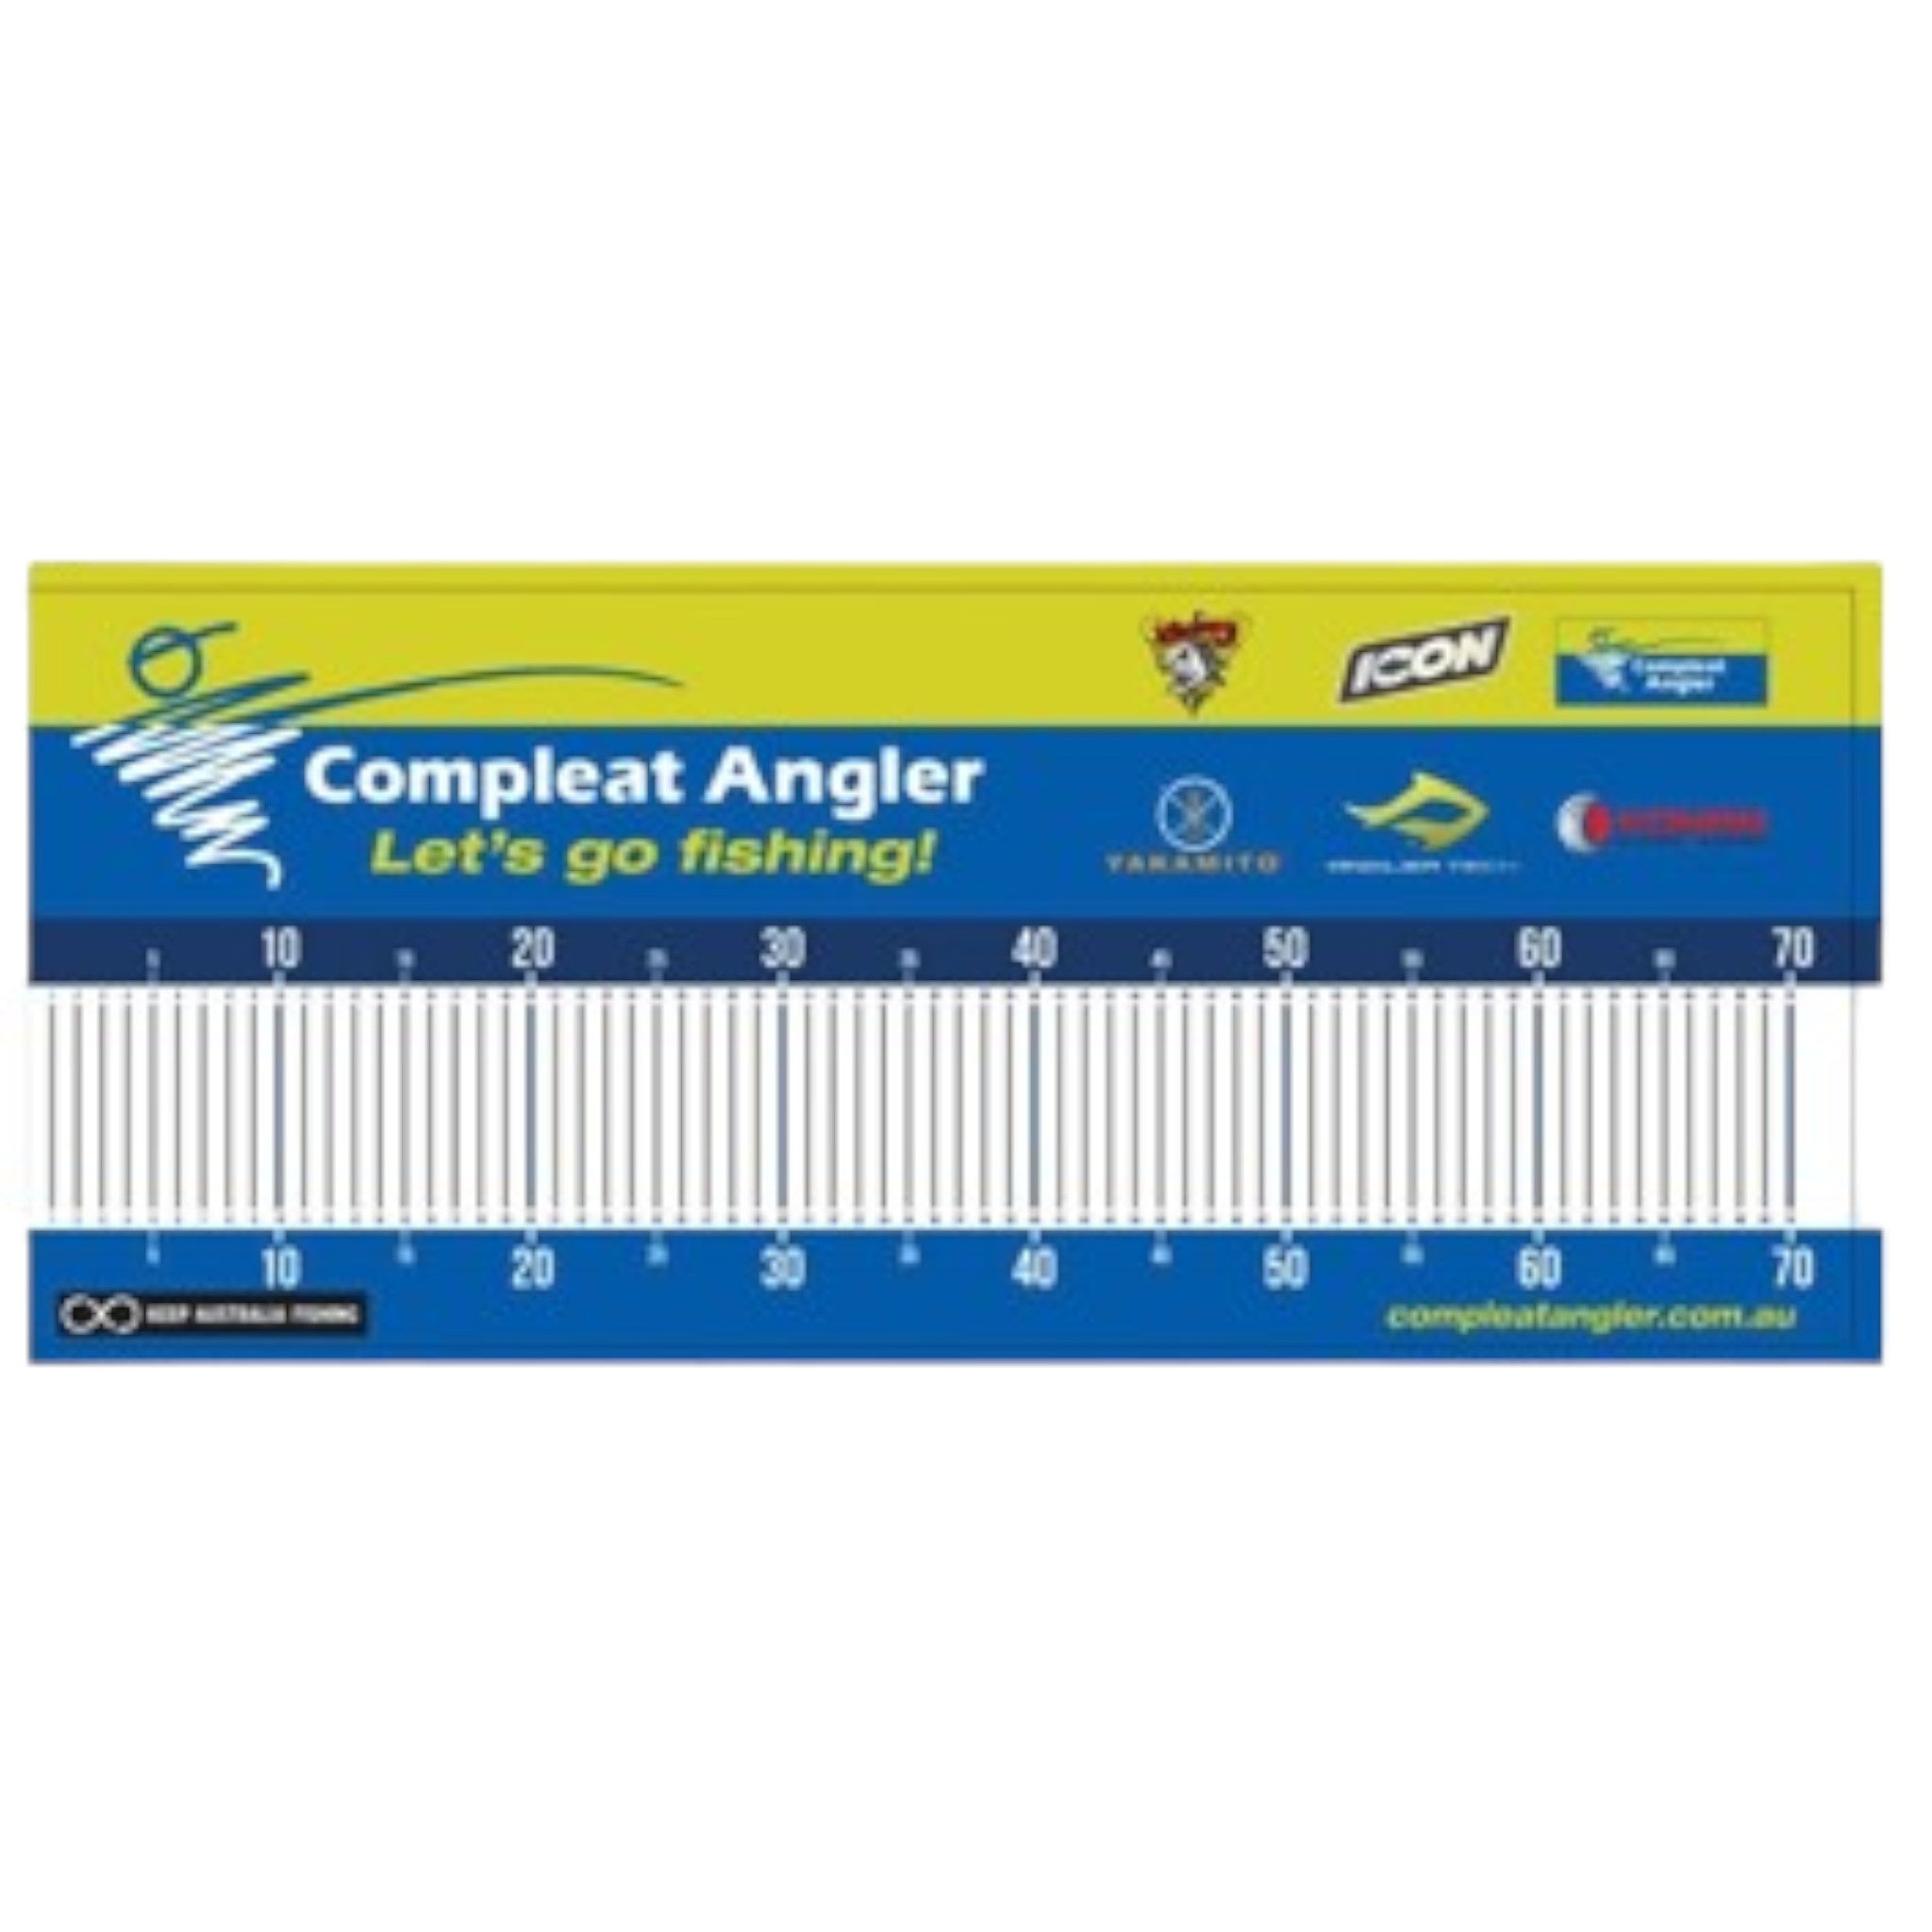 Compleat Angler Fish Mat 70cm